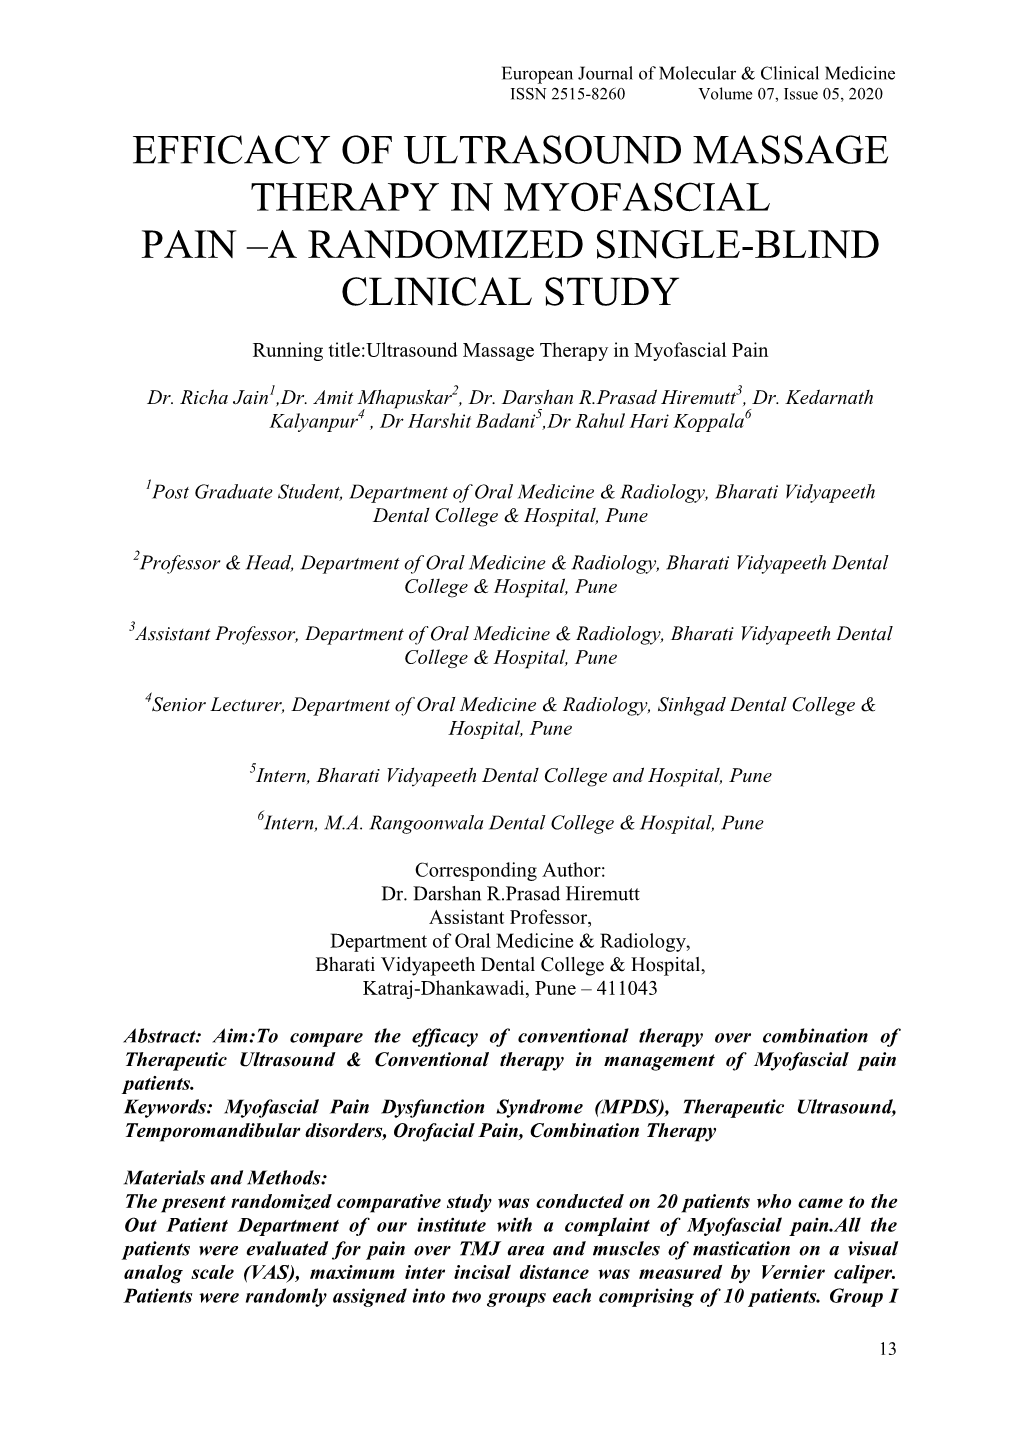 Efficacy of Ultrasound Massage Therapy in Myofascial Pain –A Randomized Single-Blind Clinical Study